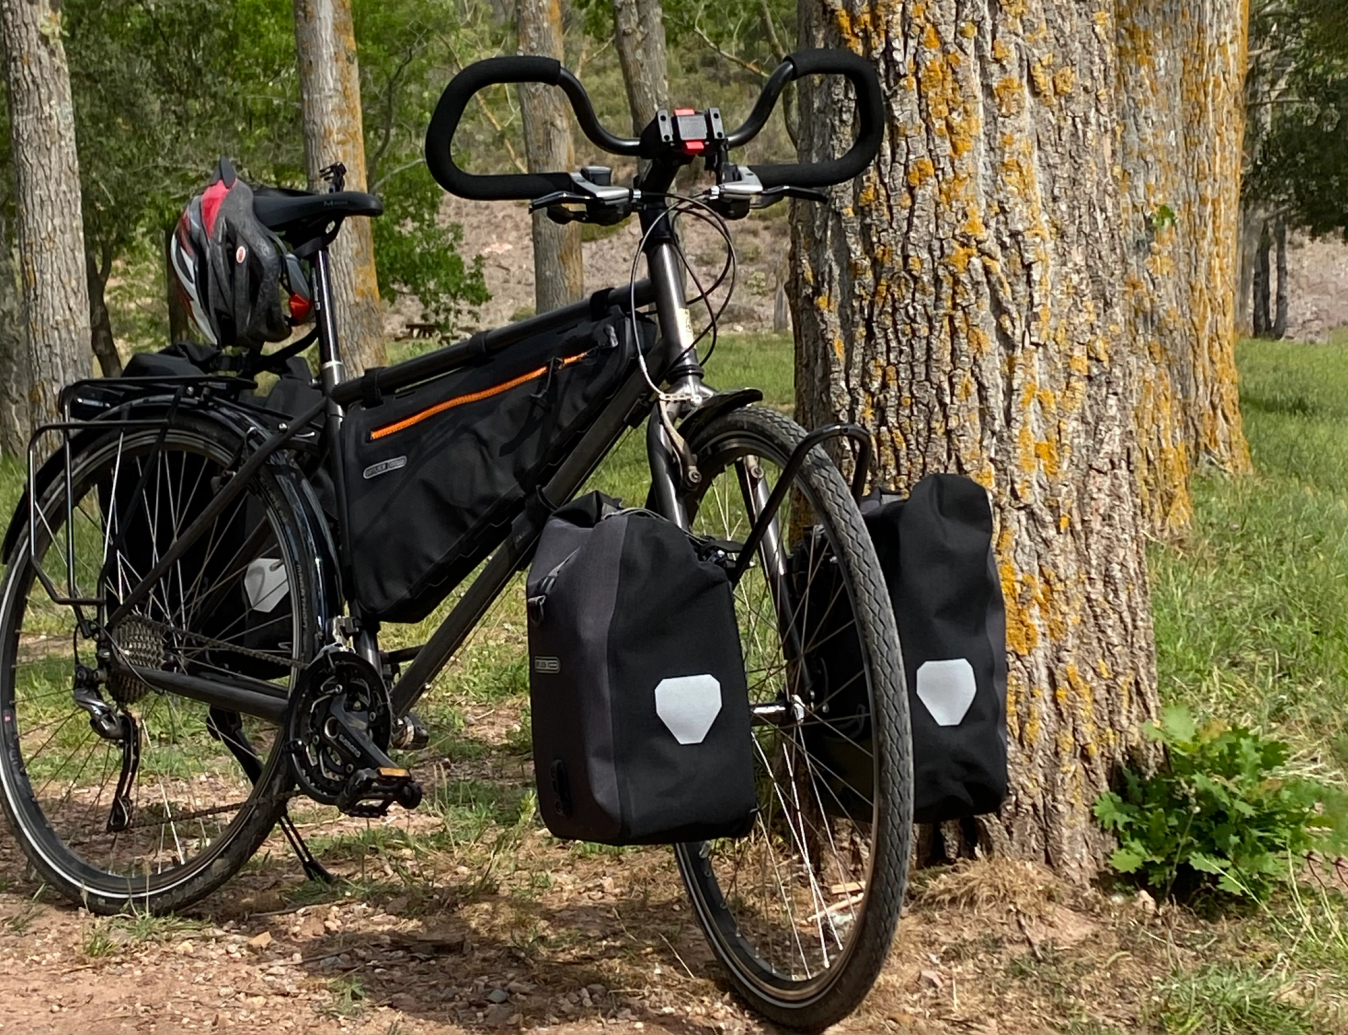 Paren't bike is a traditional tourer, with a steel frame, racks and butterfly bars